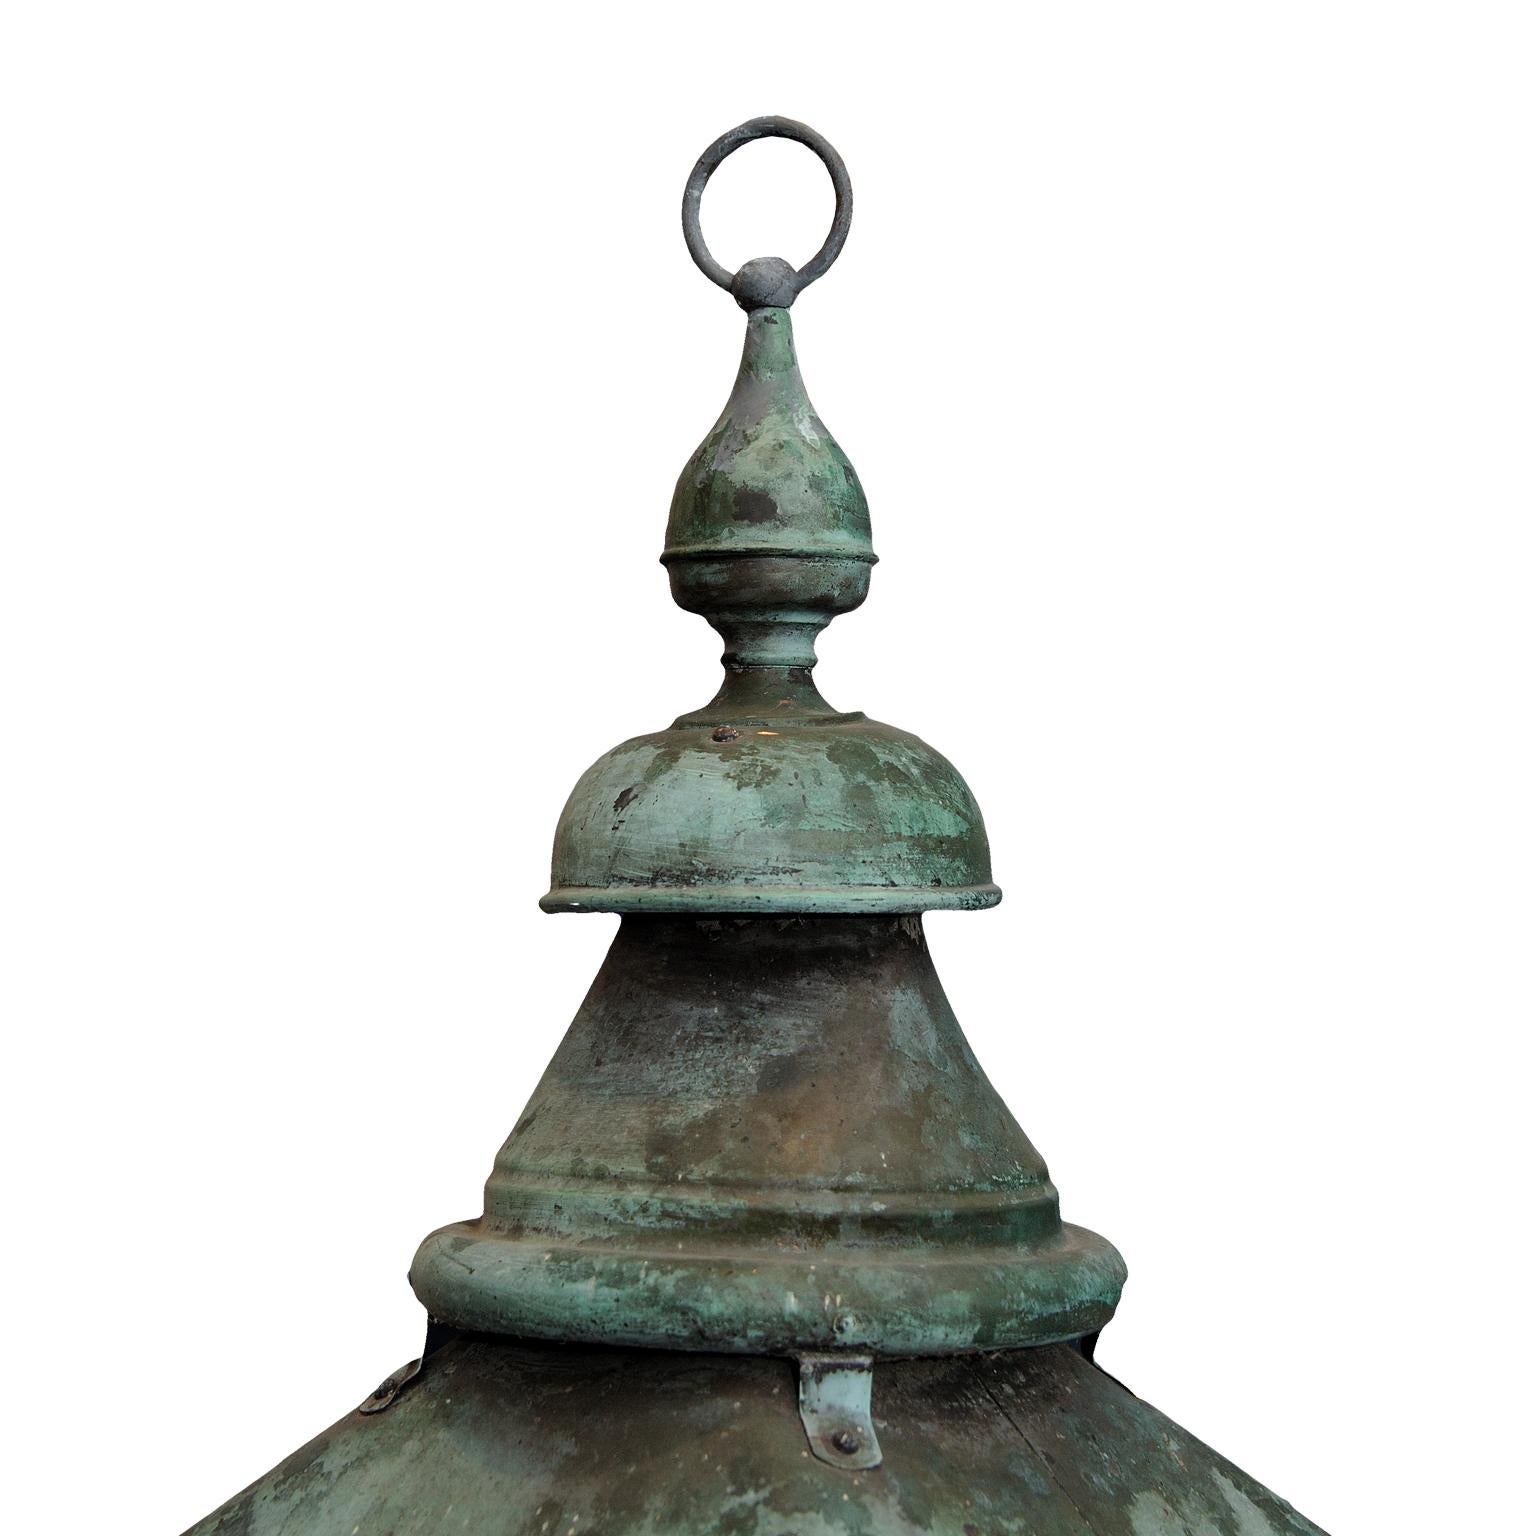 This is a very stylish large English verdigris copper hanging Lantern, now converted to electricity, suitable for interior or exterior use. Complete with lions paw feet, circa 1860.